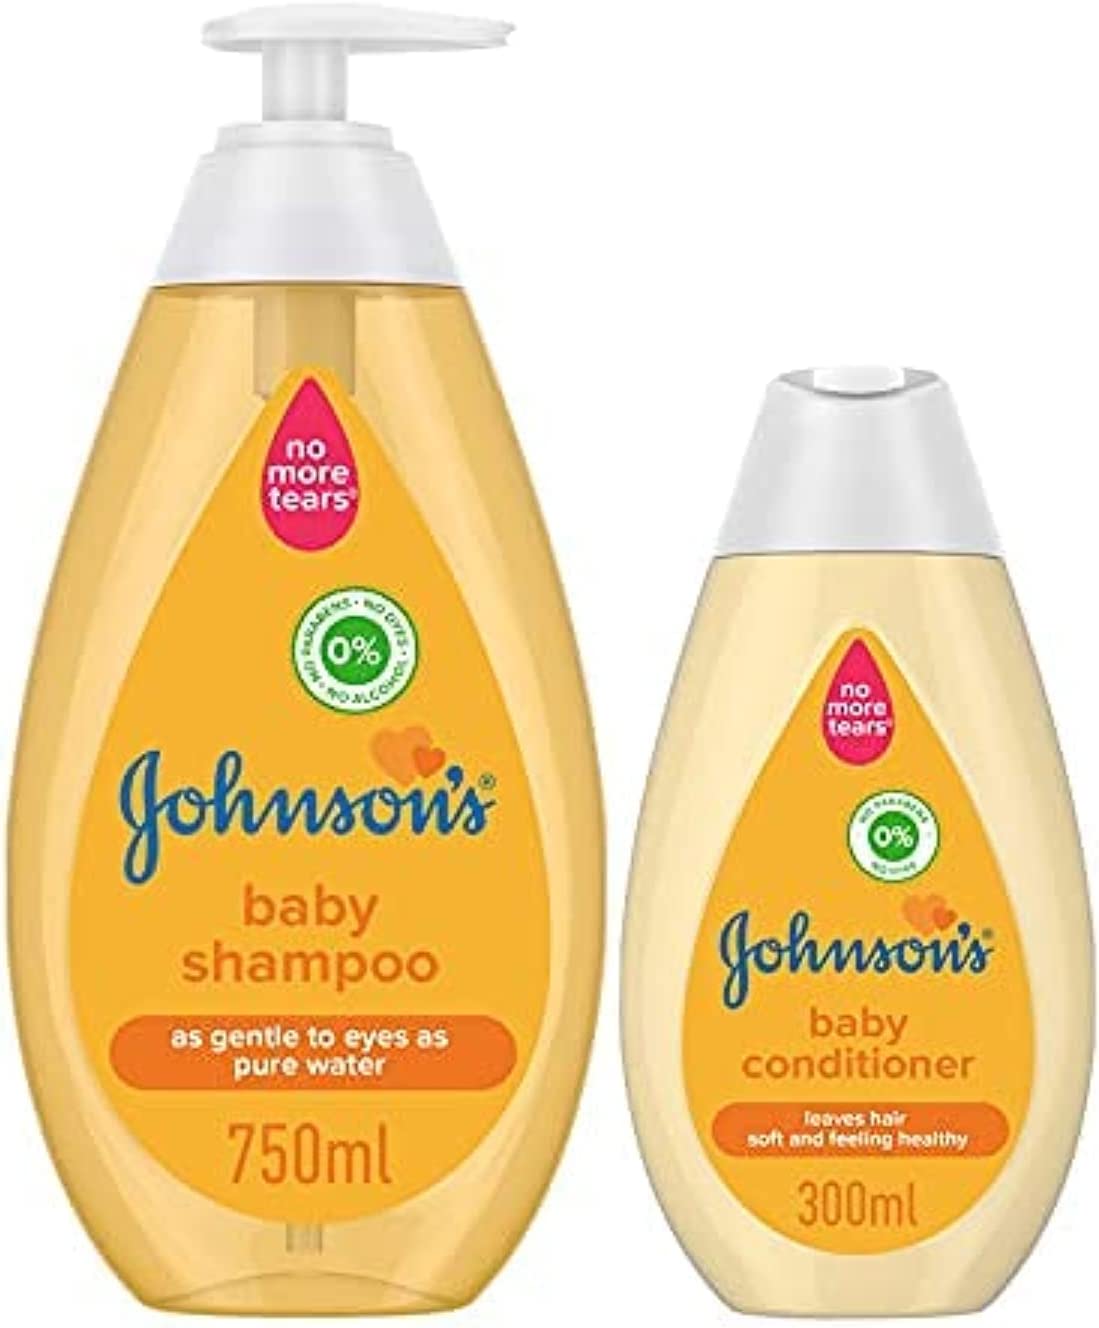 Johnson's No More Tears Baby Shampoo, 750 ml with Baby Conditioner, 300ml